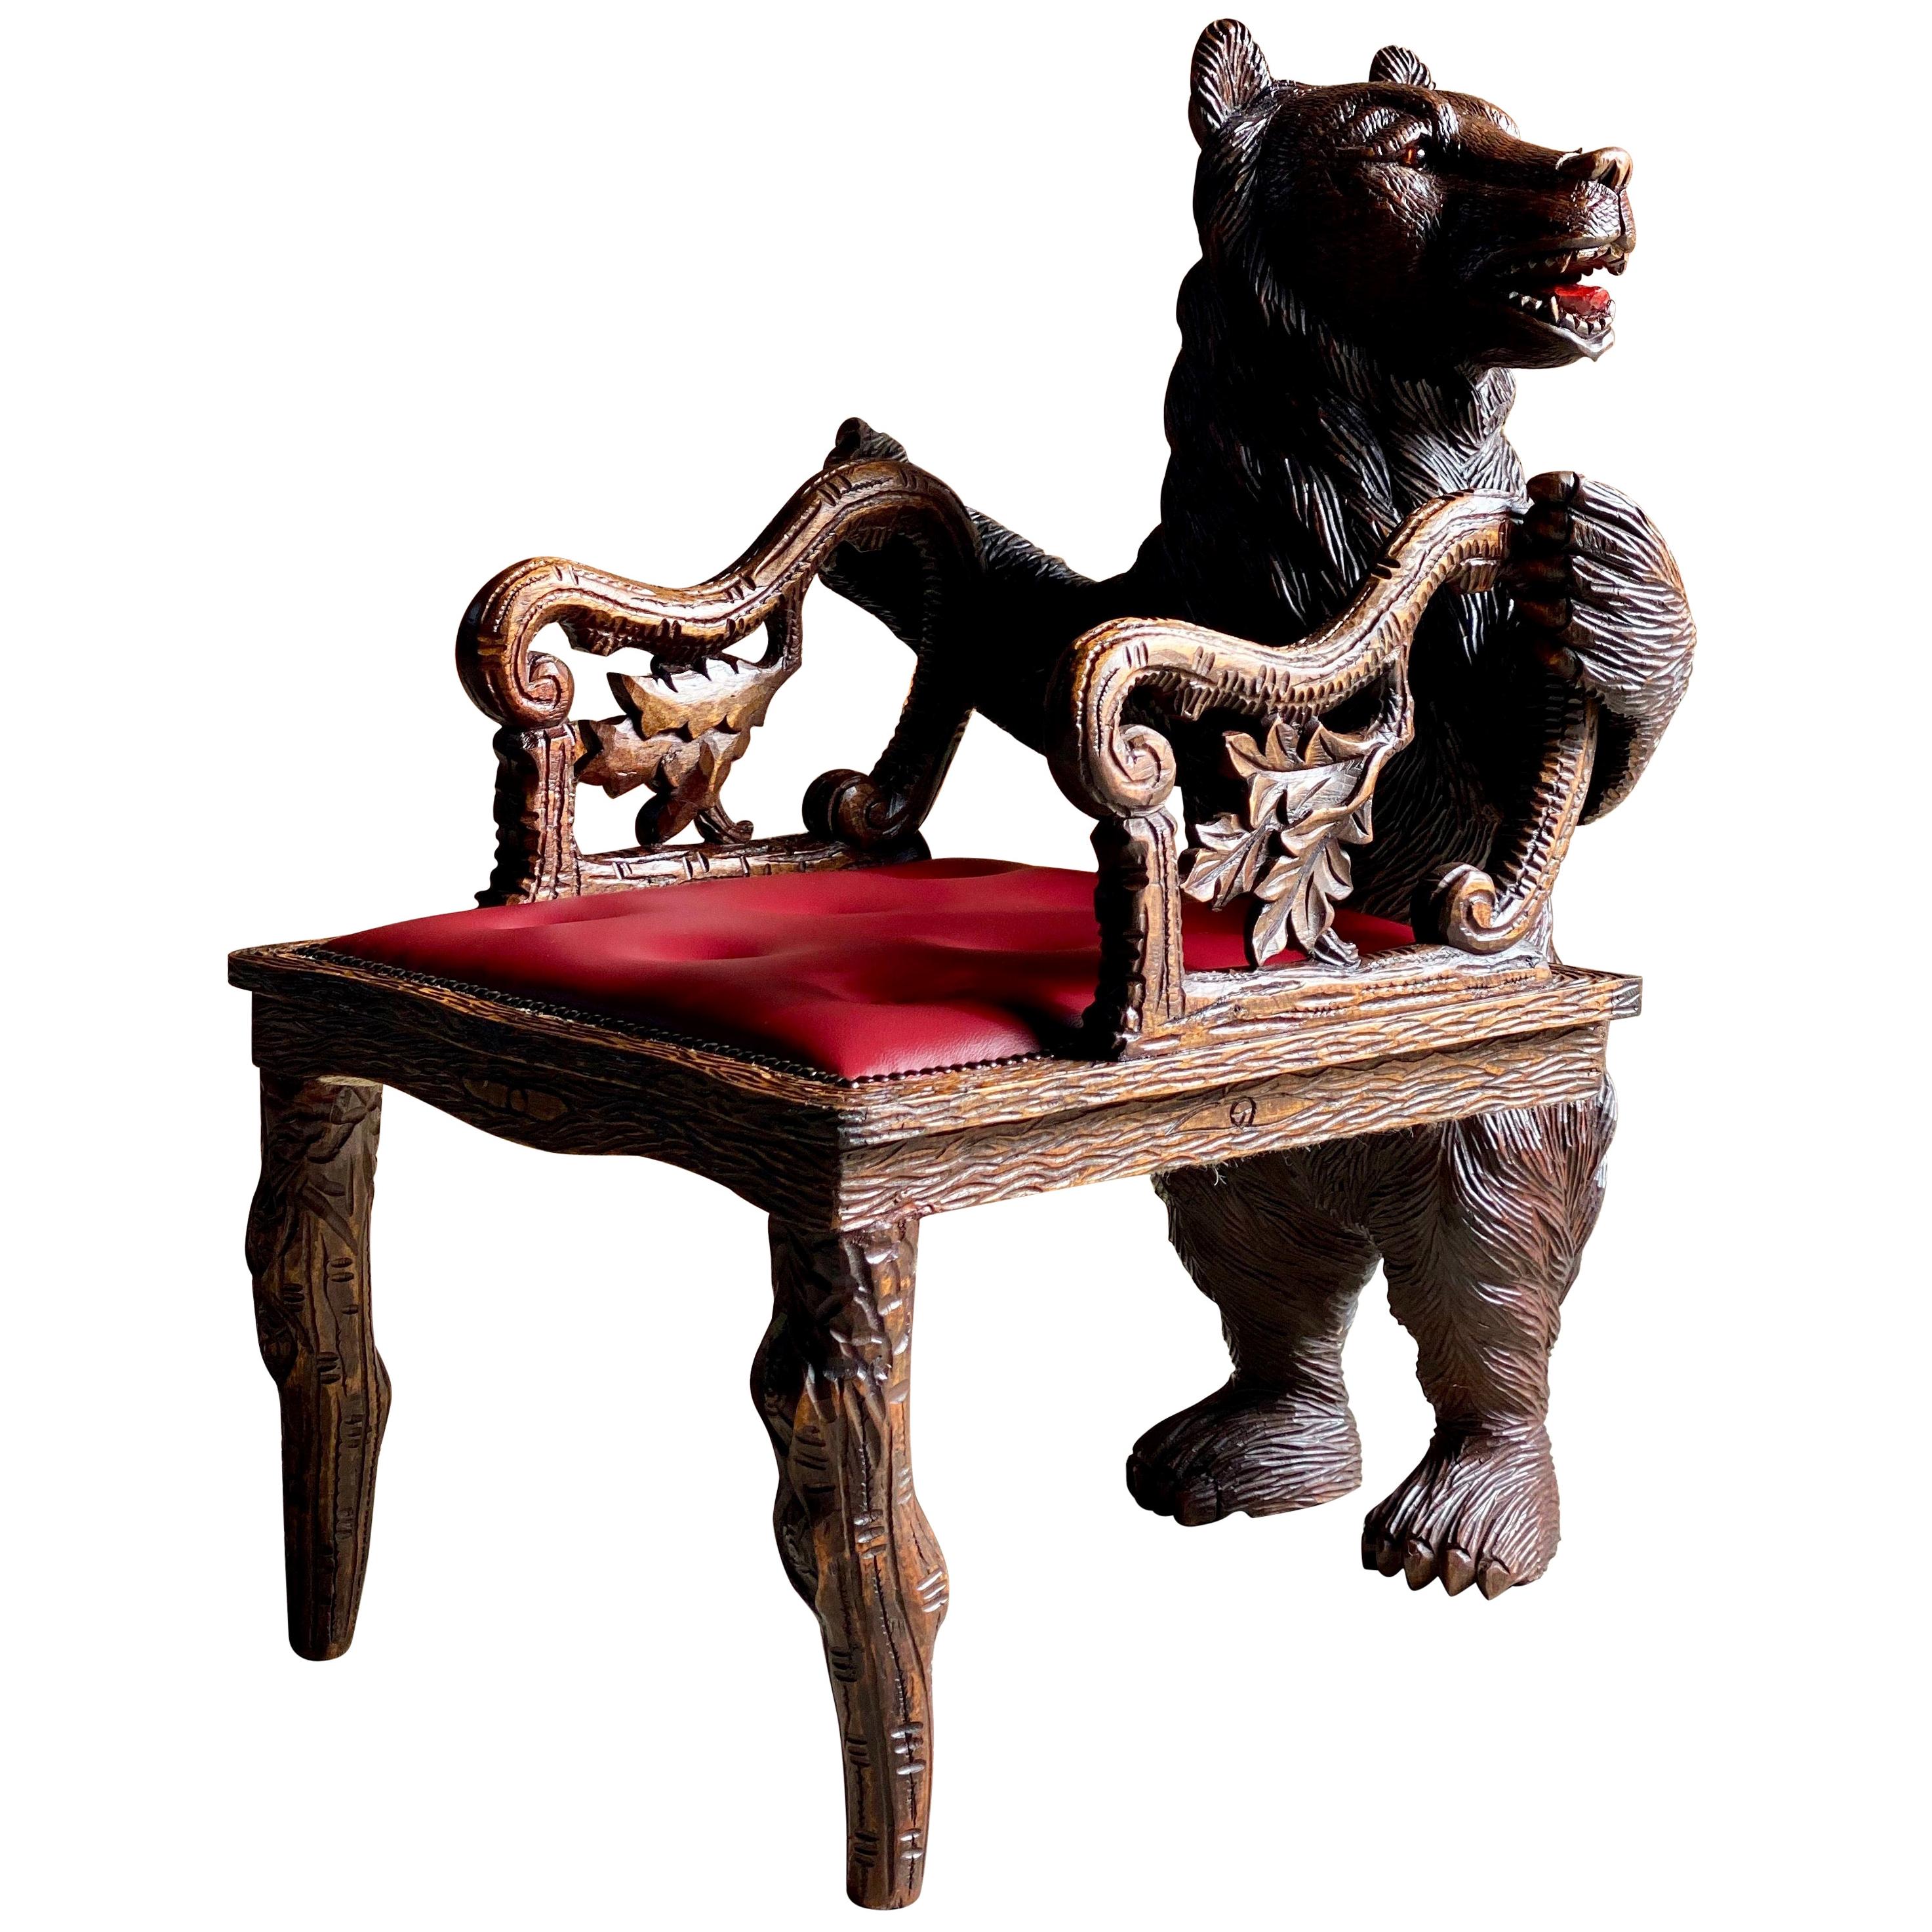 Antique Black Forest carved bear hall chair armchair, 19th century, circa 1875

Magnificent Swiss 19th century Black Forest carved bear hall chair circa 1875, the bear standing on his hind legs looking to his left with his mouth open showing teeth